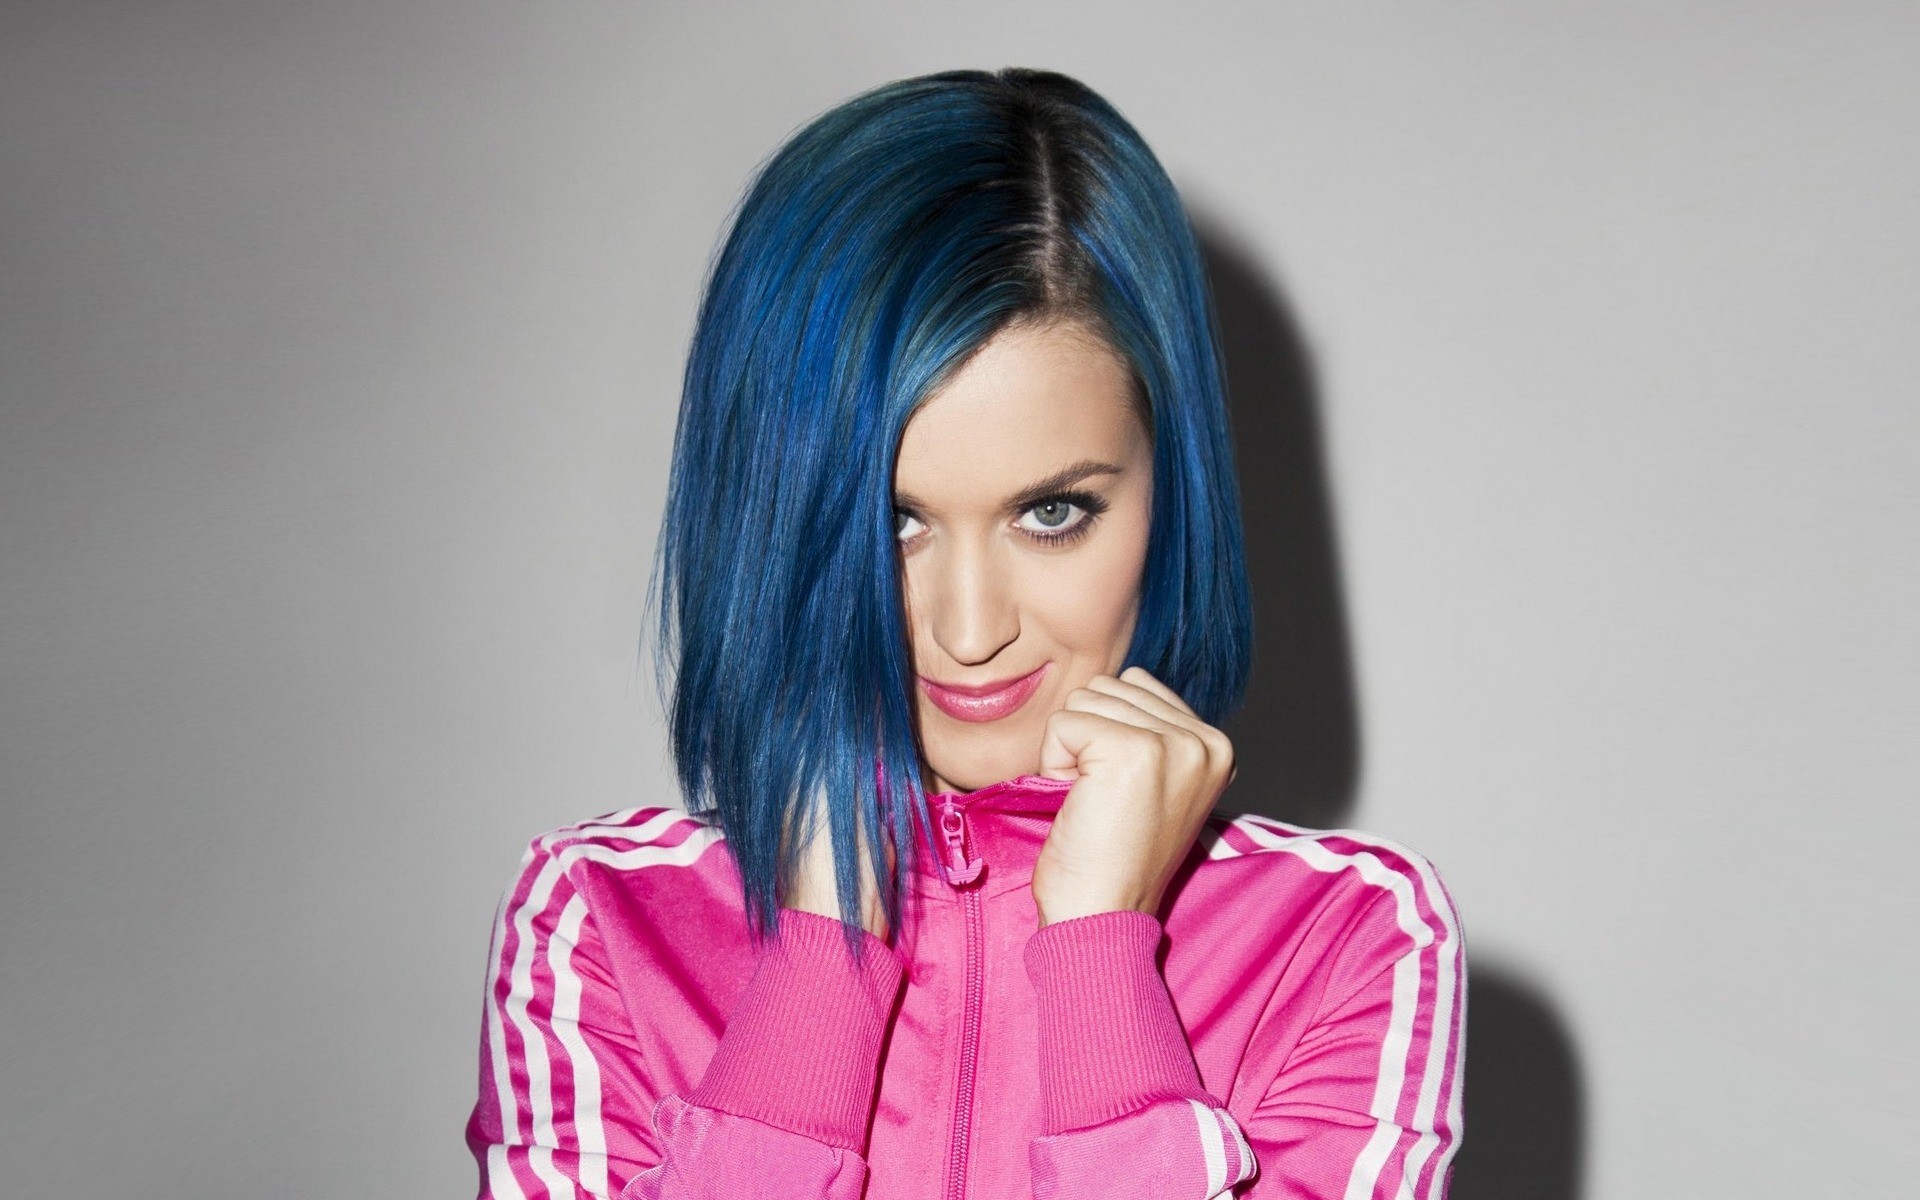 26 Best Images Katy Perry Short Blue Hair - Katy Perry Has A Blonde Bob And You Need To See It